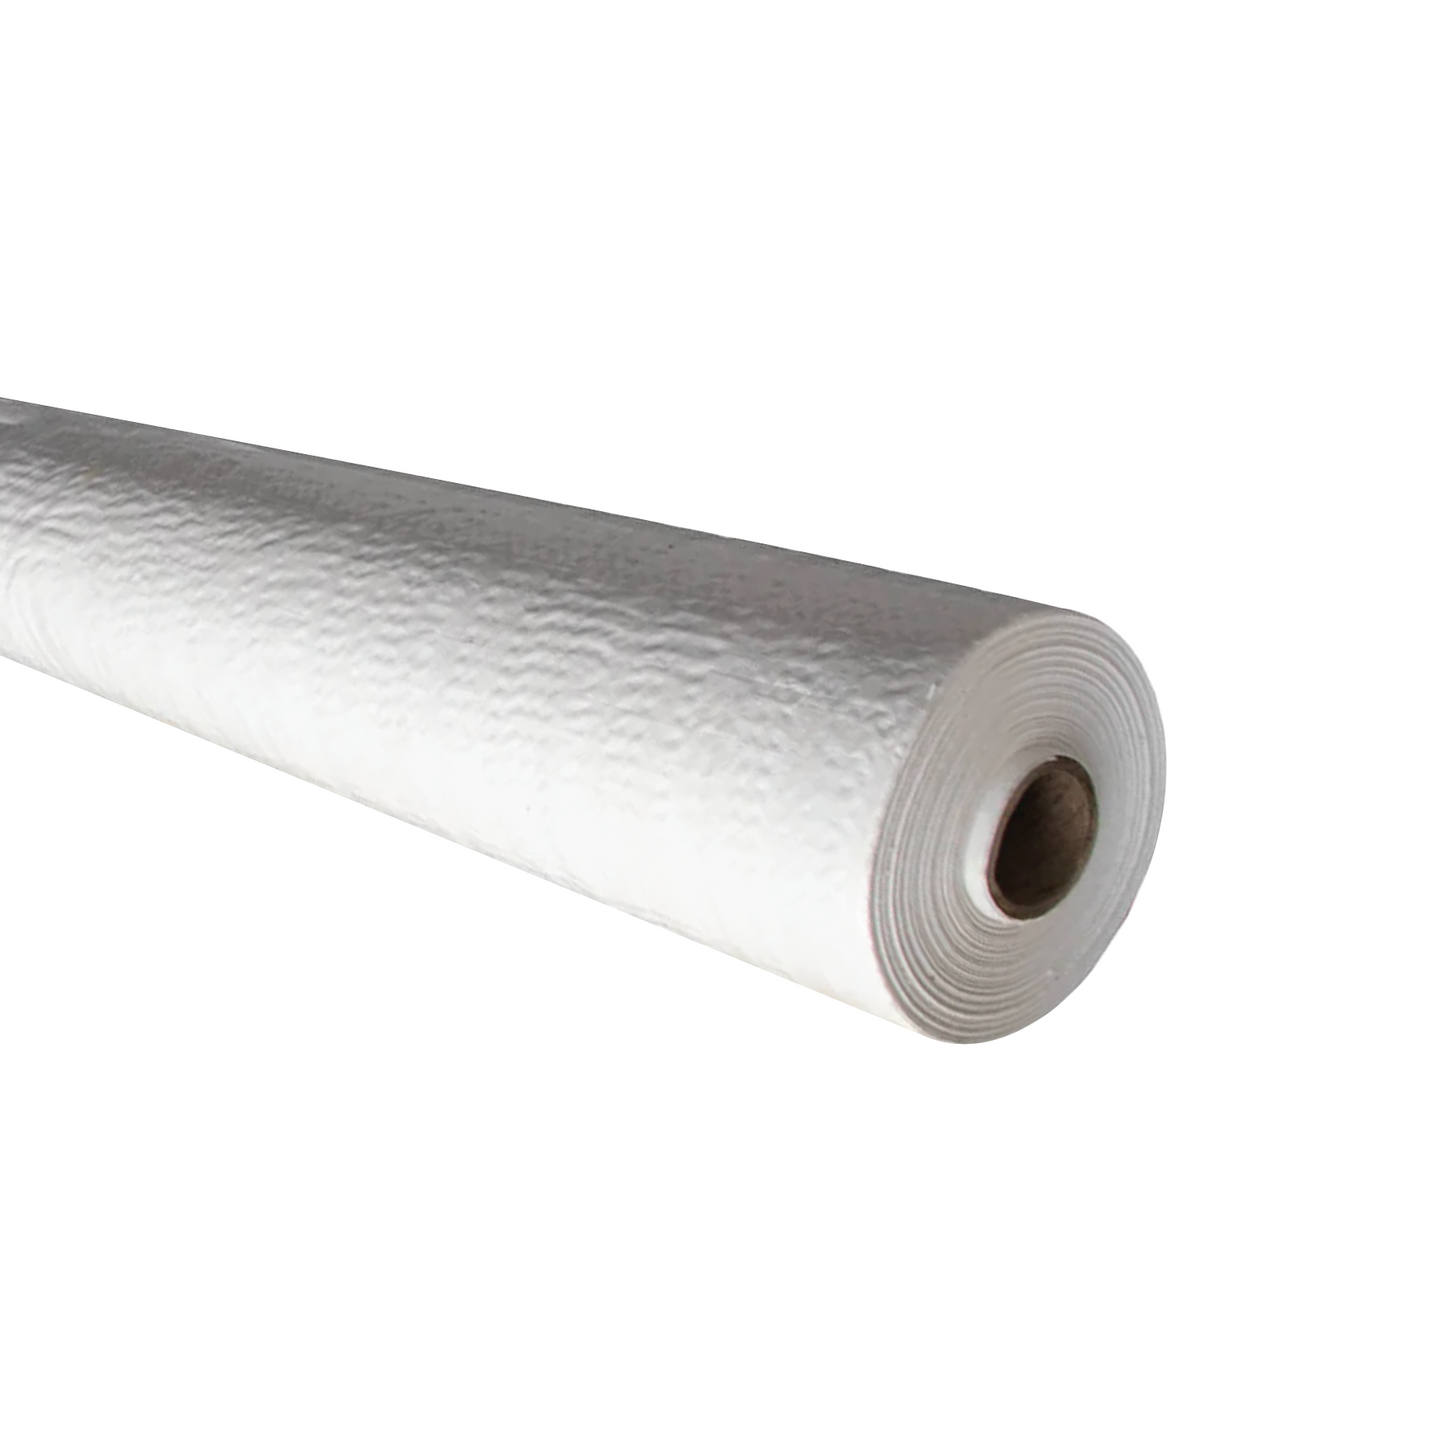 Polyweave Protection Cover Roll - 13Kg, 1.83m x 100m (thickness: 80gsm)